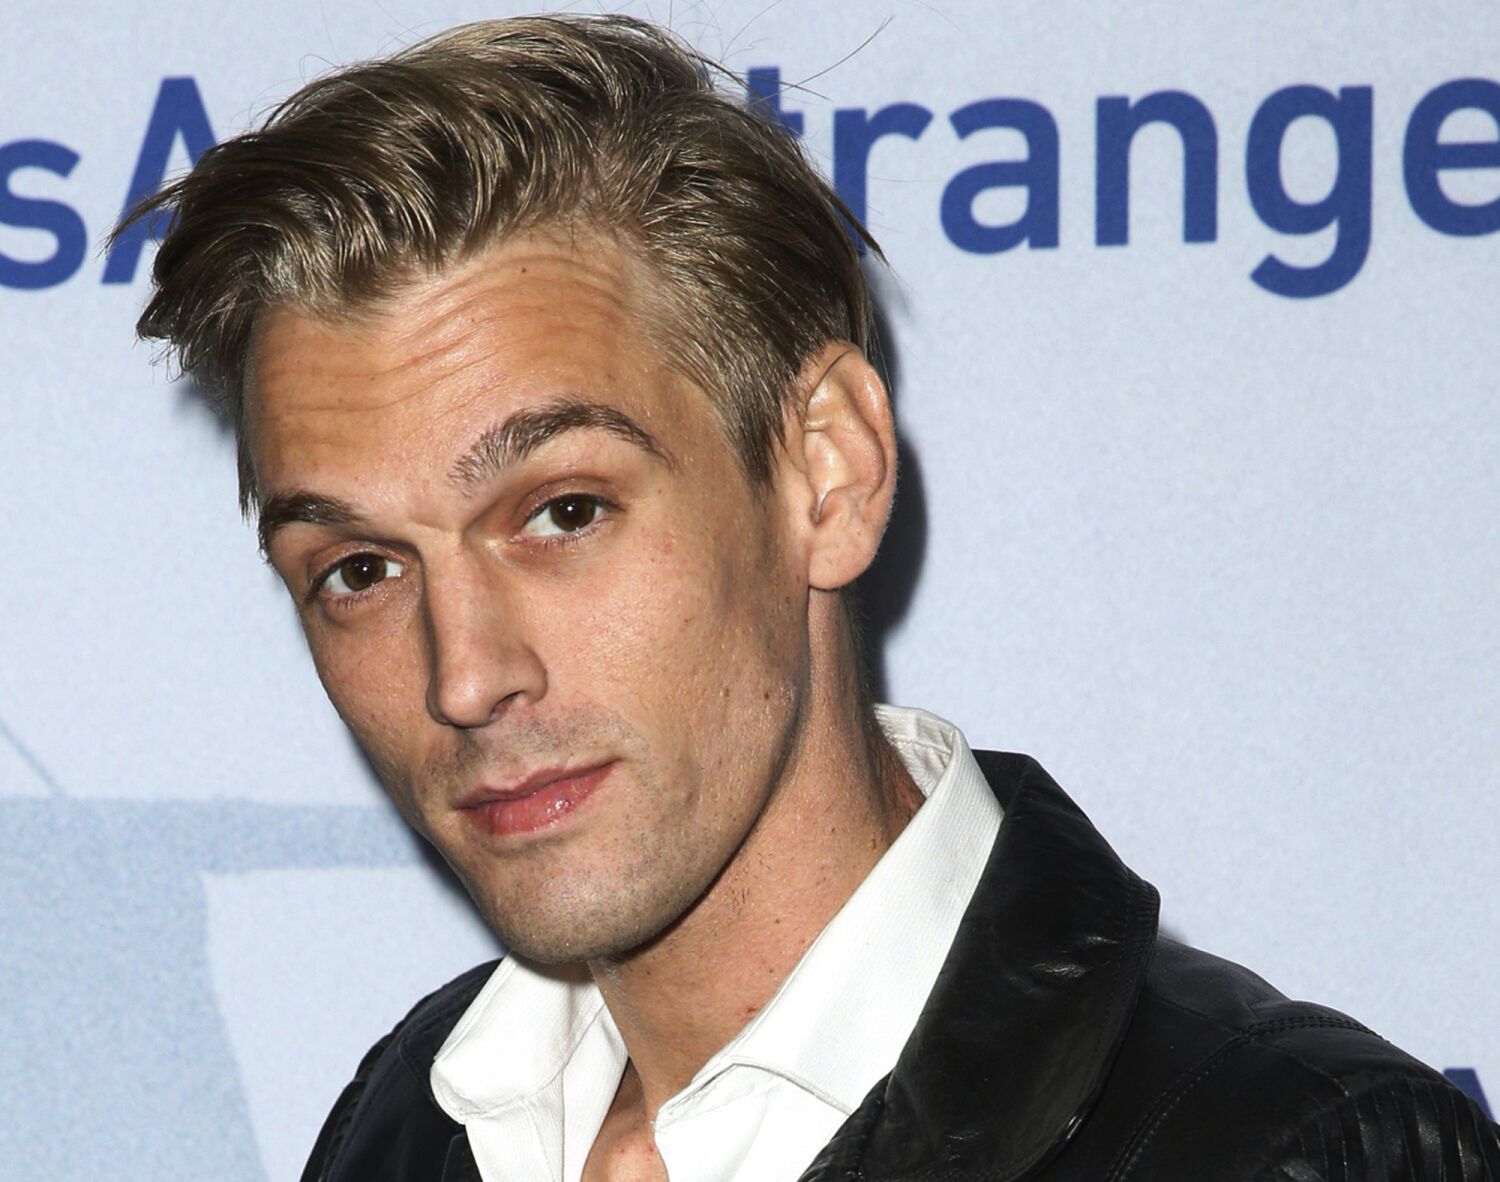 Aaron Carter memoir delayed amid pushback from singer's publicist and Hilary Duff